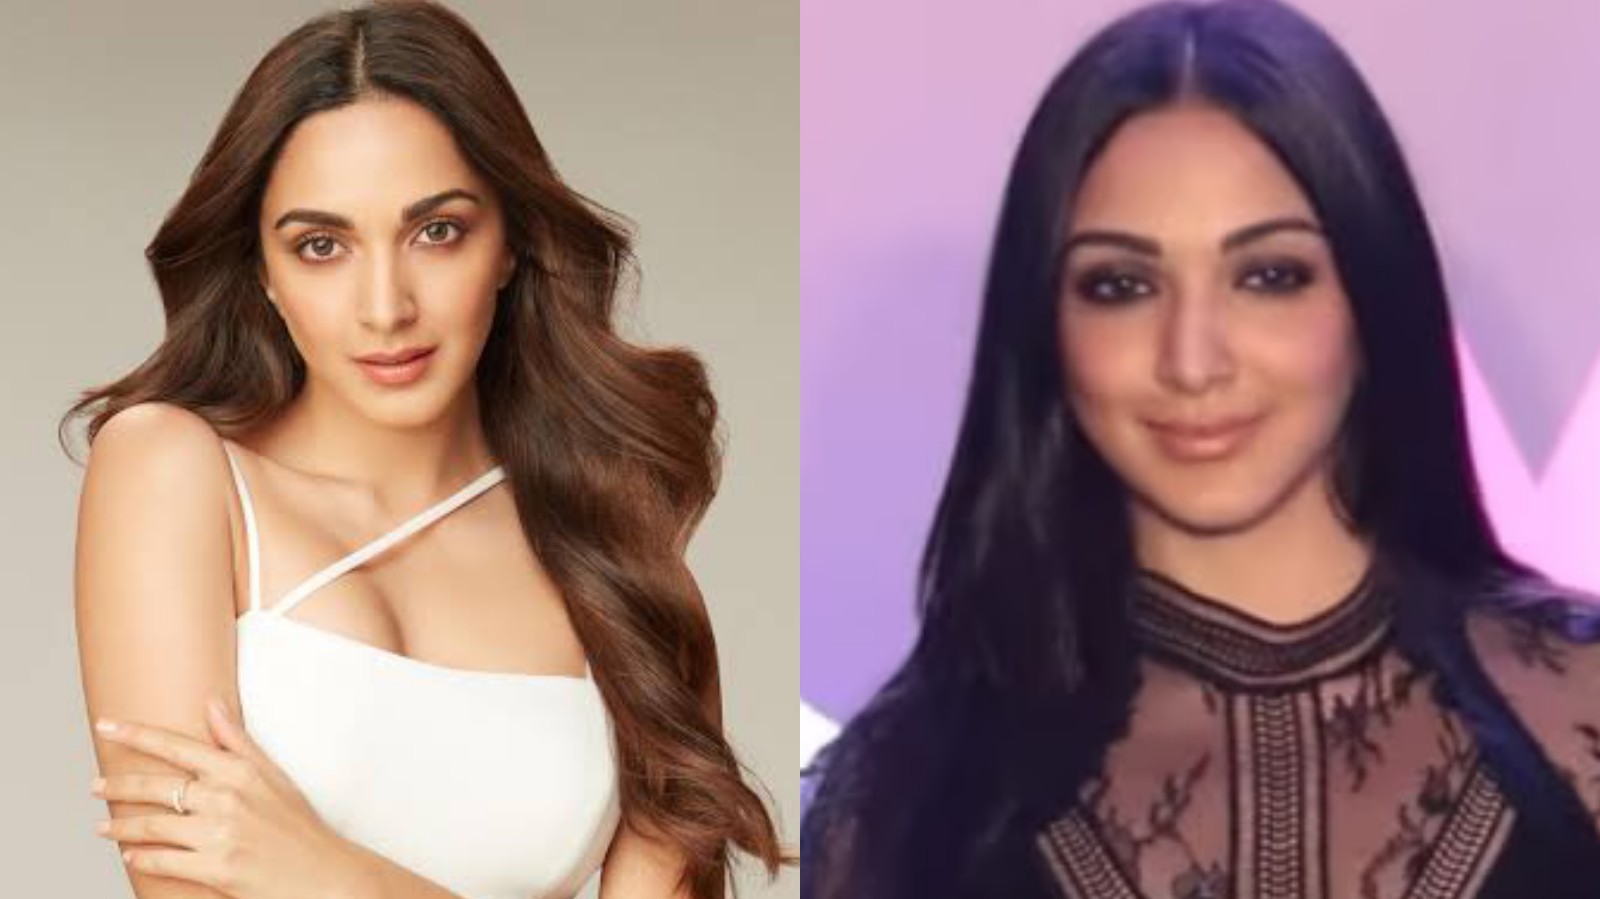 Kiara Advani opened up when rumors of her plastic surgery disturbed her & even led her to almost believe it 890157